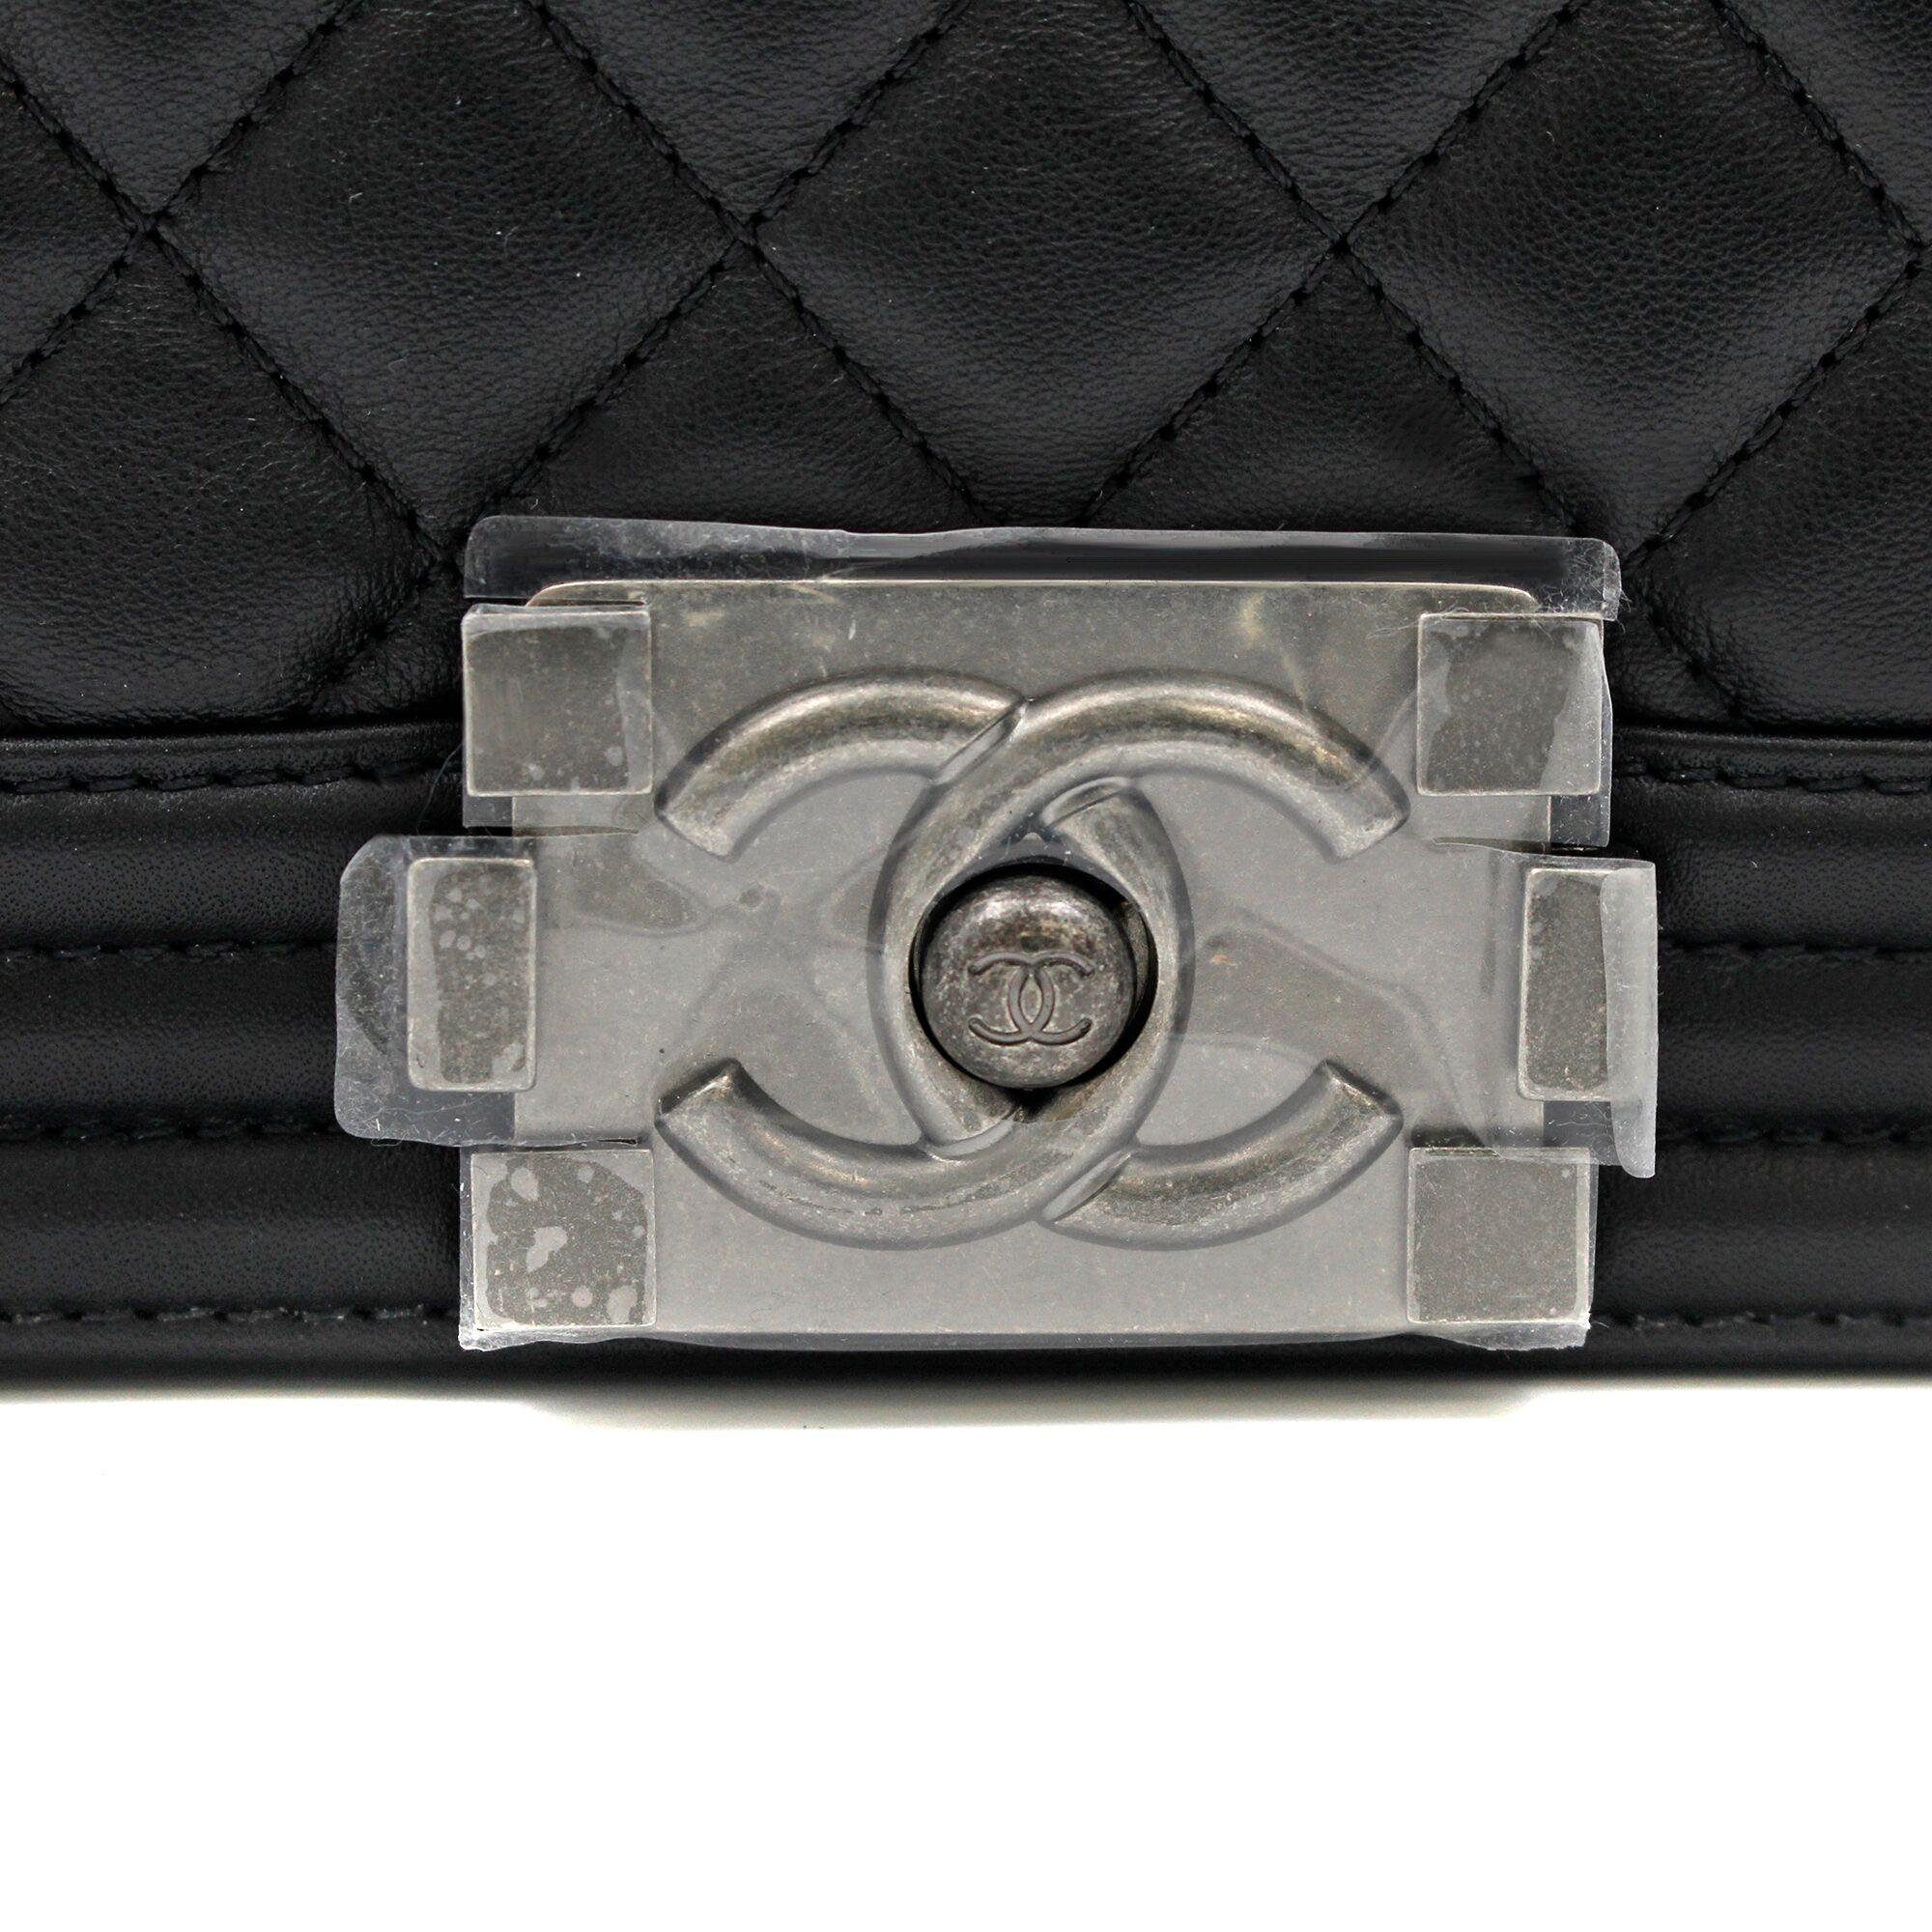 Chanel Black Calfskin Quilted Ruthenium Tone Large Boy Flap Bag A92193 6